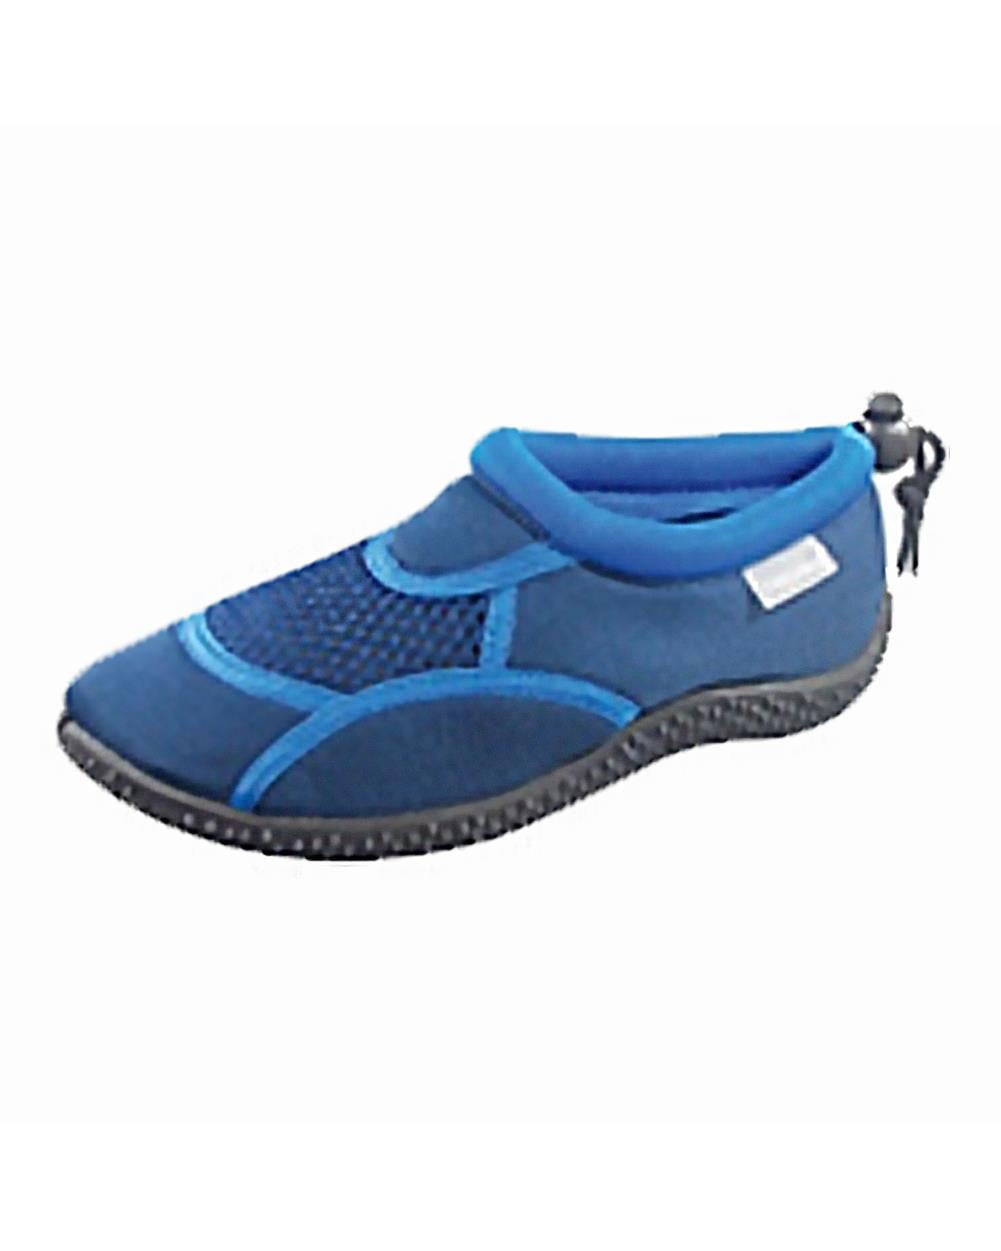 boys water shoes size 13